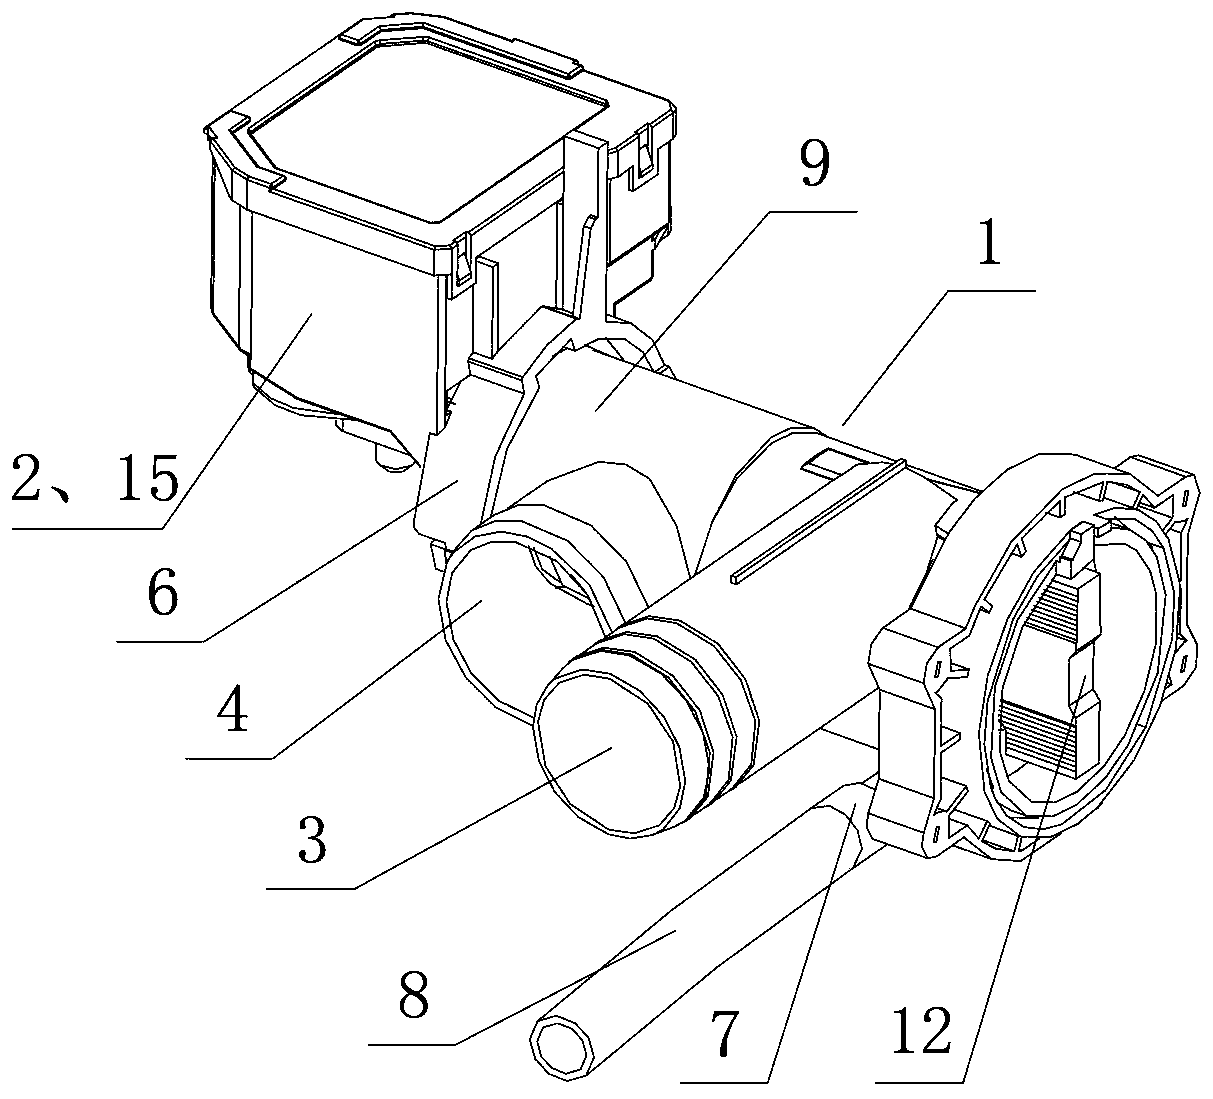 An integrated drainage assembly and washing machine